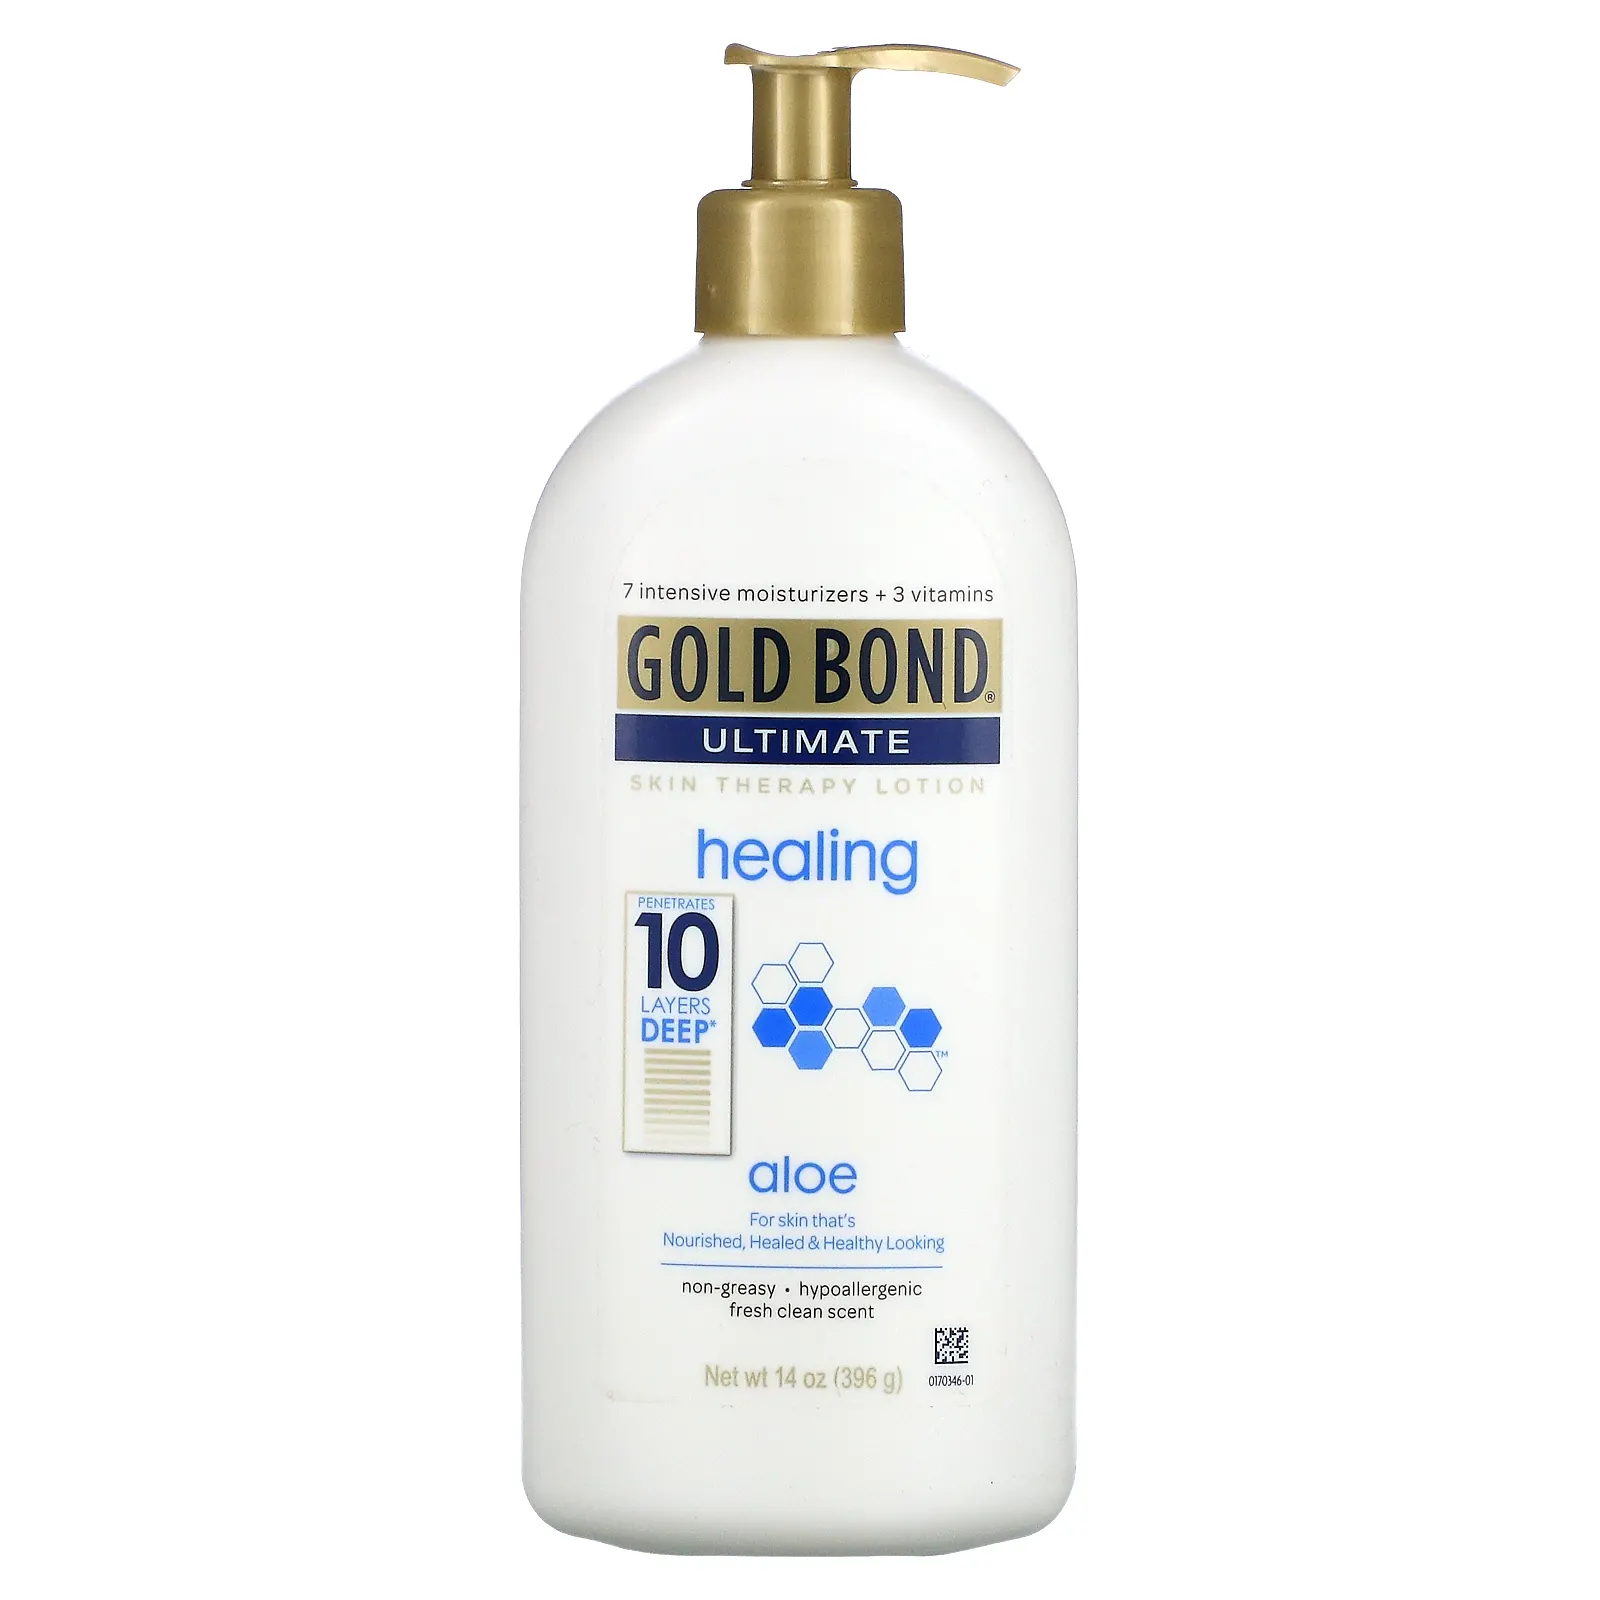 FEMMENORDIC's choice in the Gold Bond vs Eucerin comparison, the Gold Bond Healing Skin Therapy Lotion